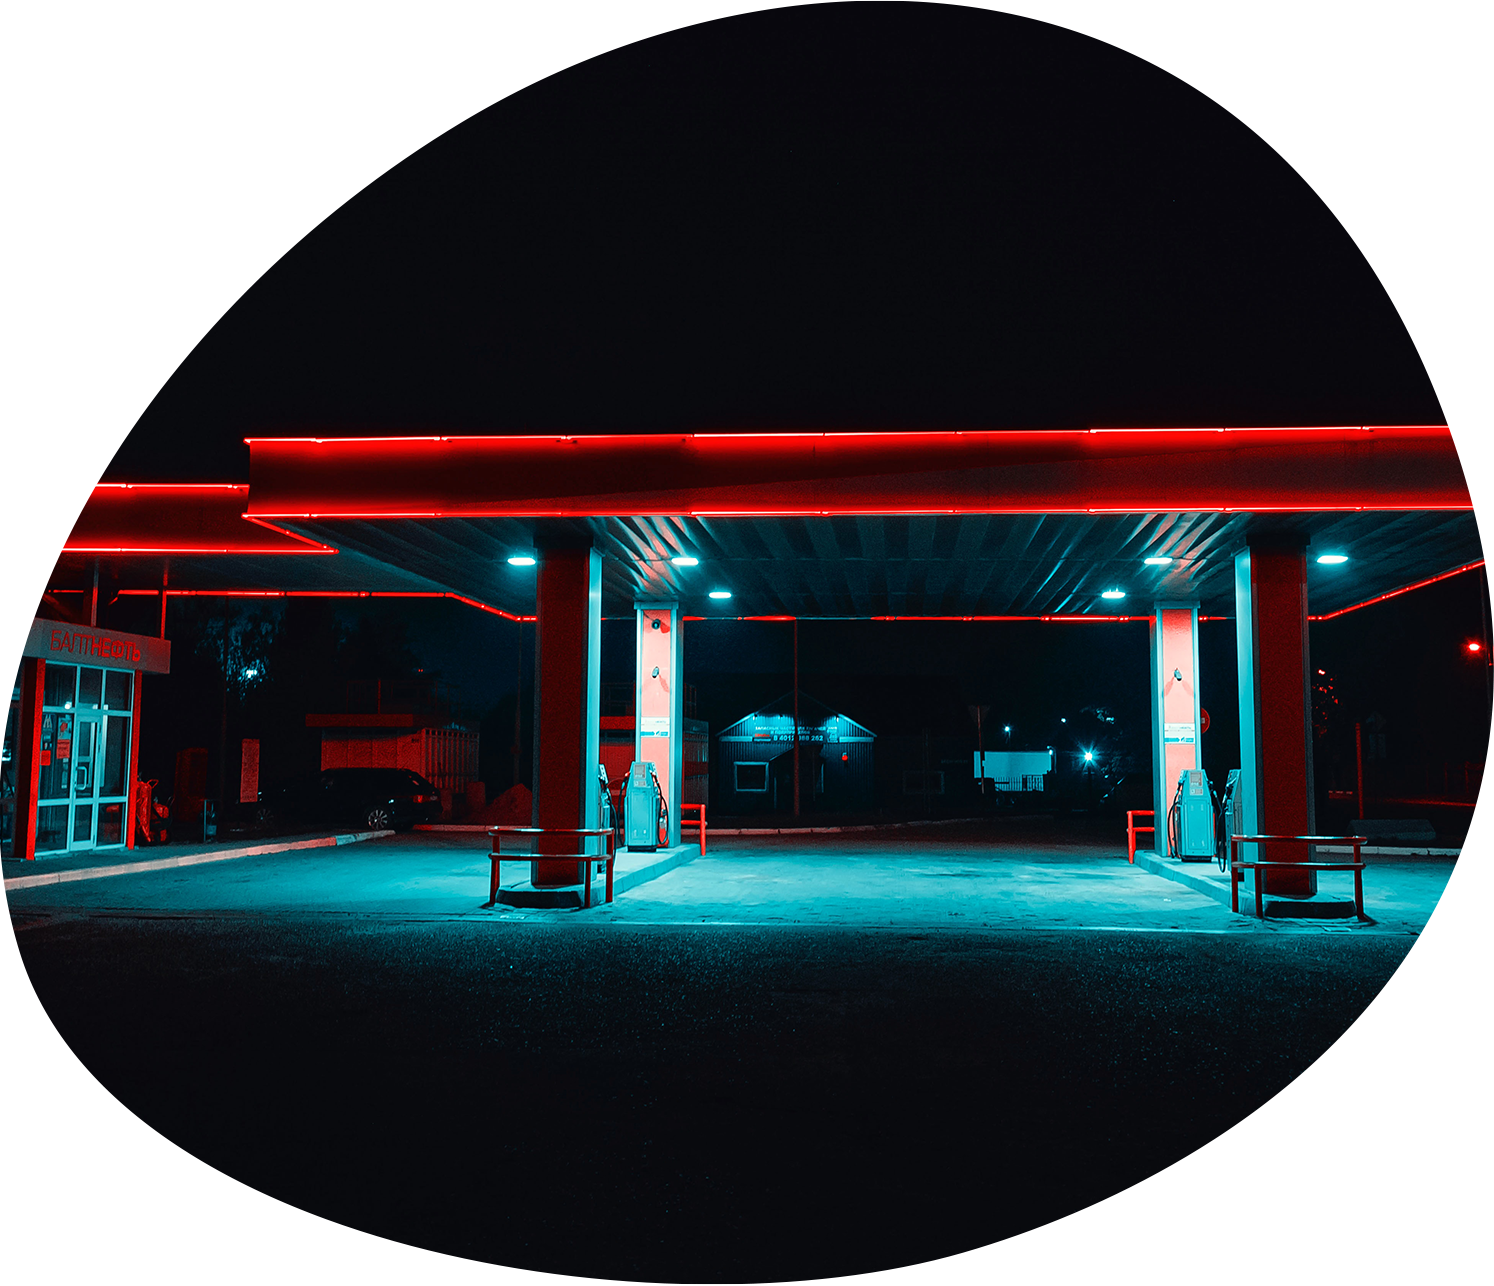 A brightly lit filling station forecourt at night